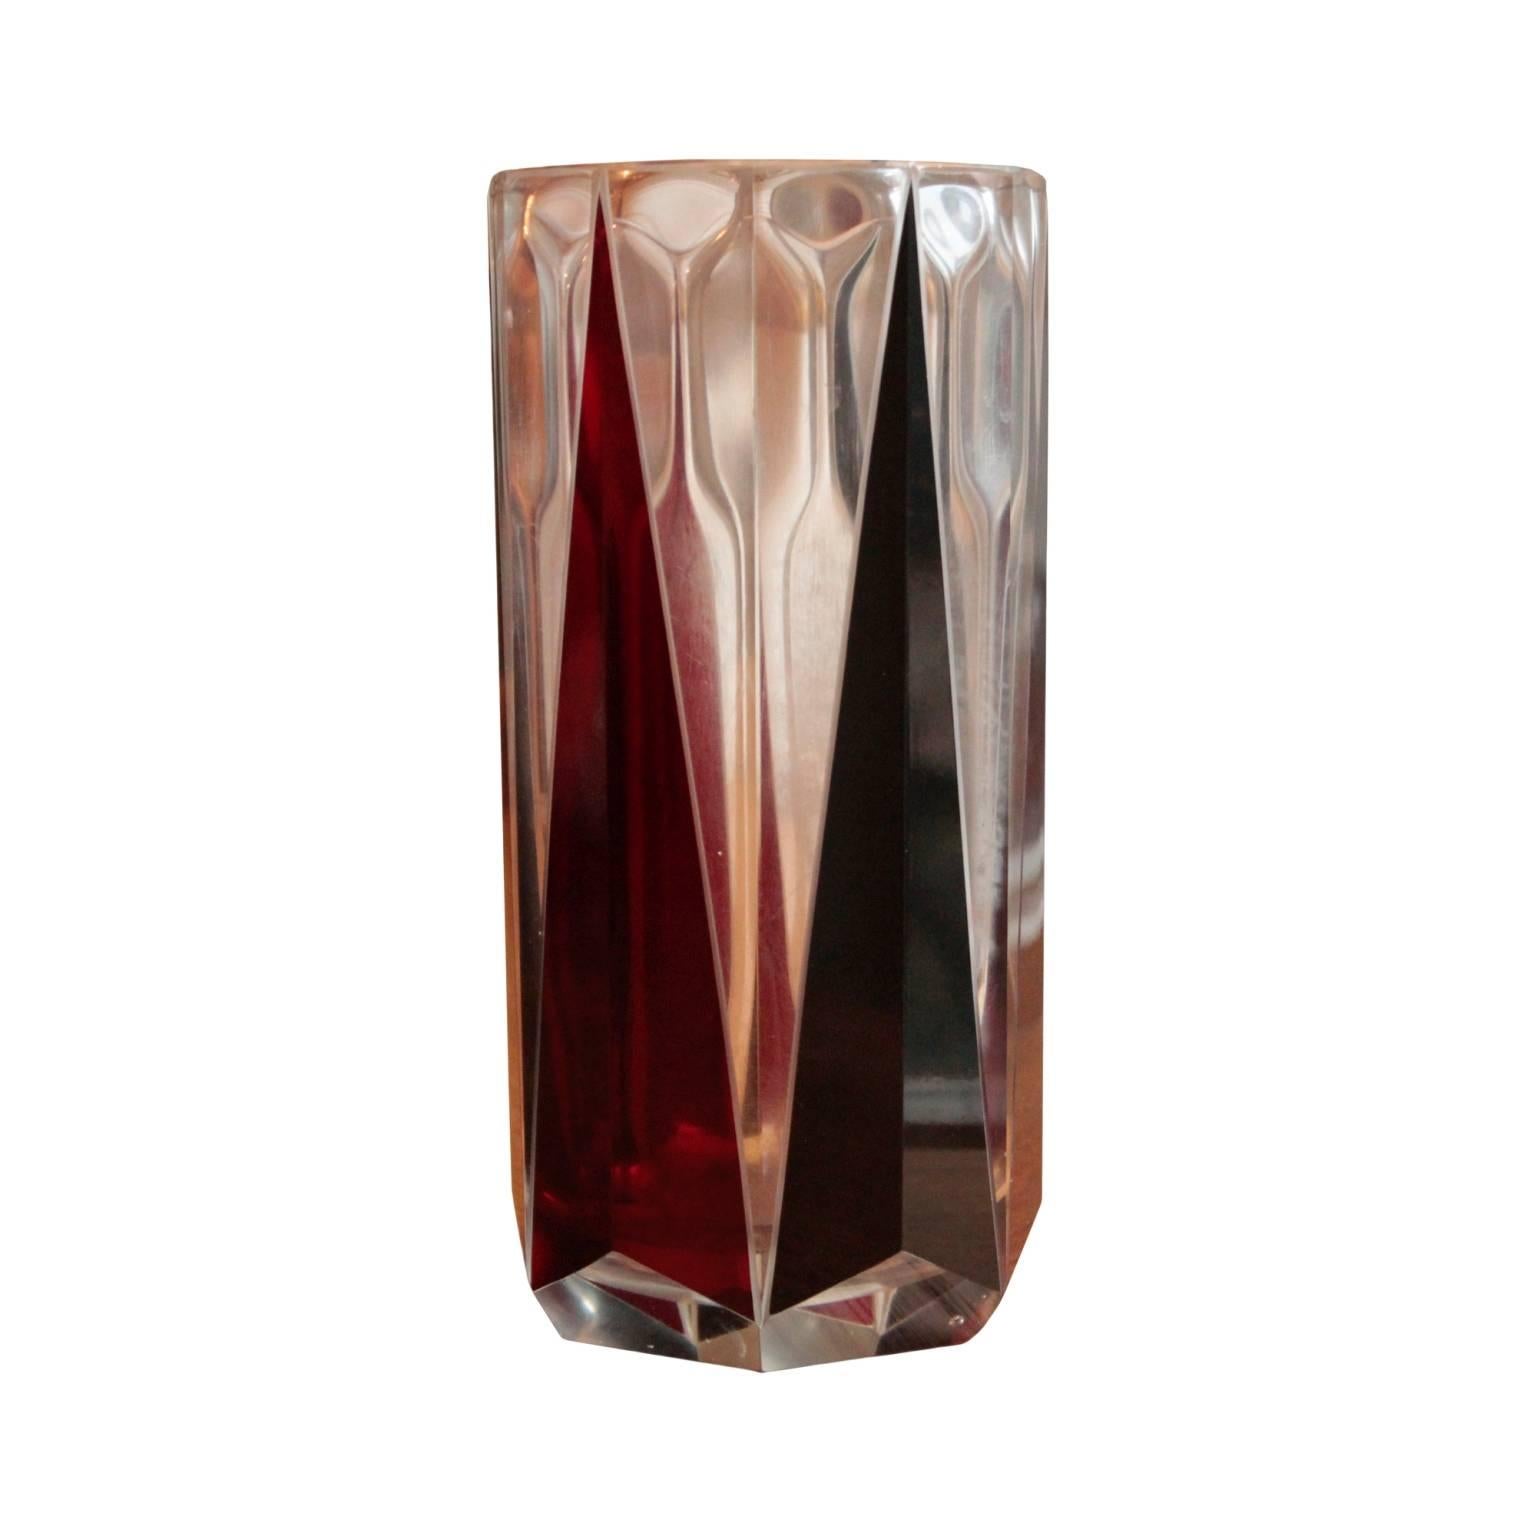 Dodecagonal (12 sided) Art Deco period cut-glass vase featuring six radially arranged and corresponding burgundy and black elongated triangles. Possibly Czech Republic.